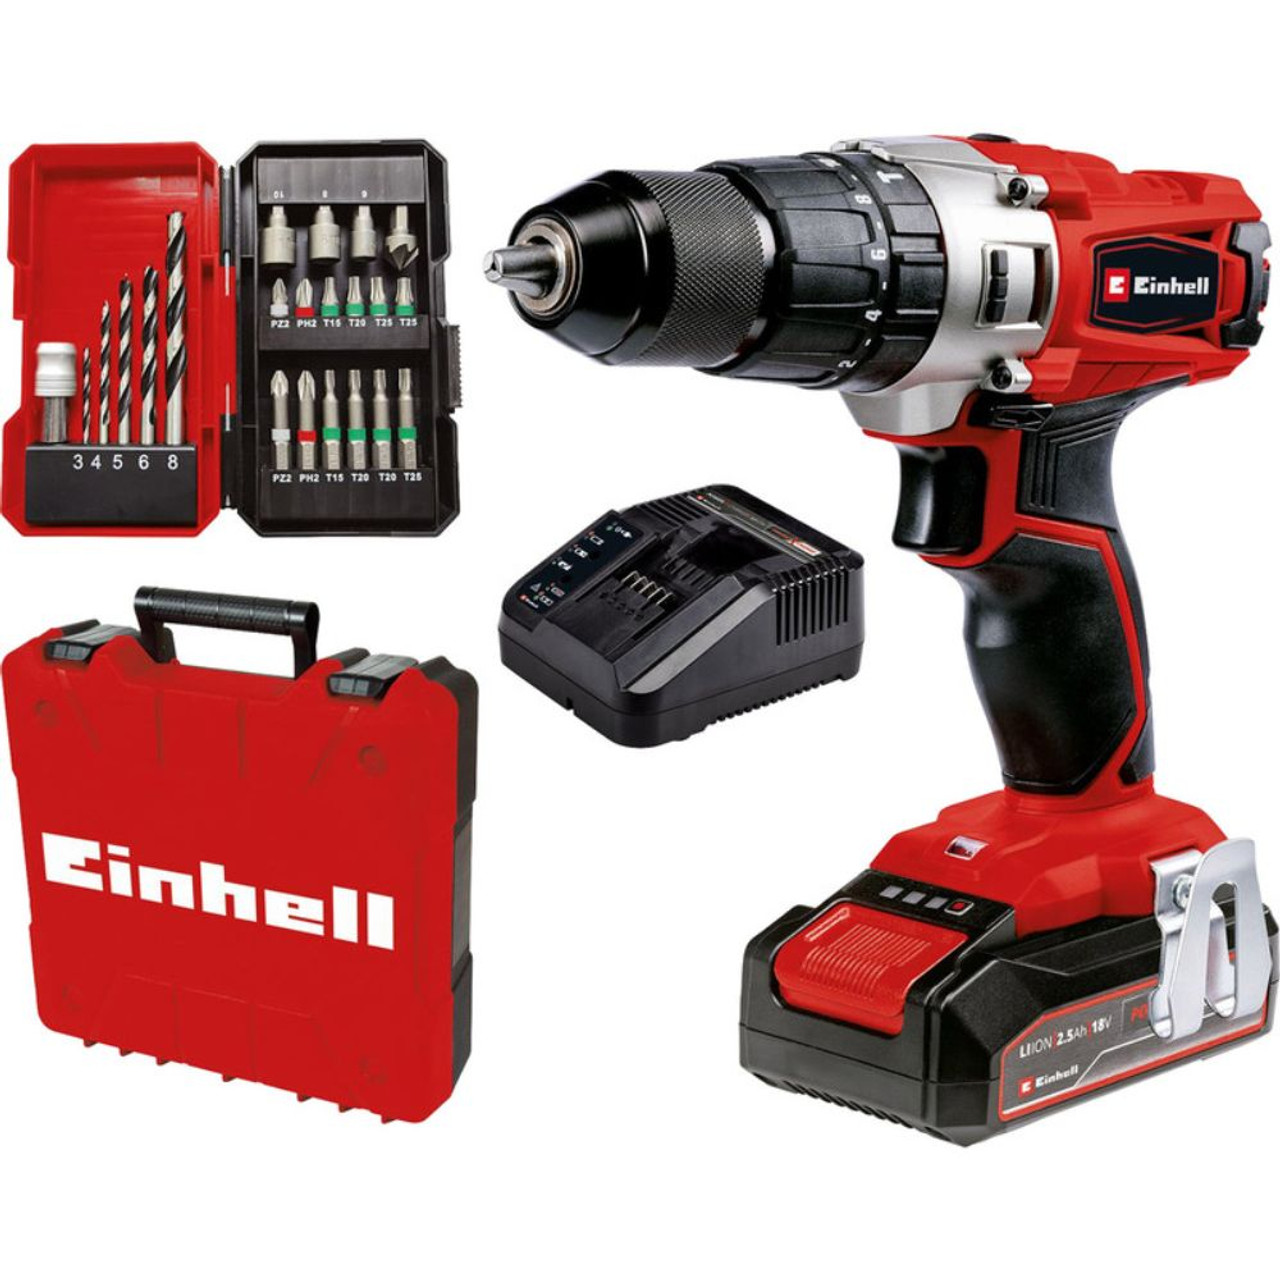 Einhell Power X-Change 18V Cordless Impact Drill with 1x 2.5Ah Kit 4514220